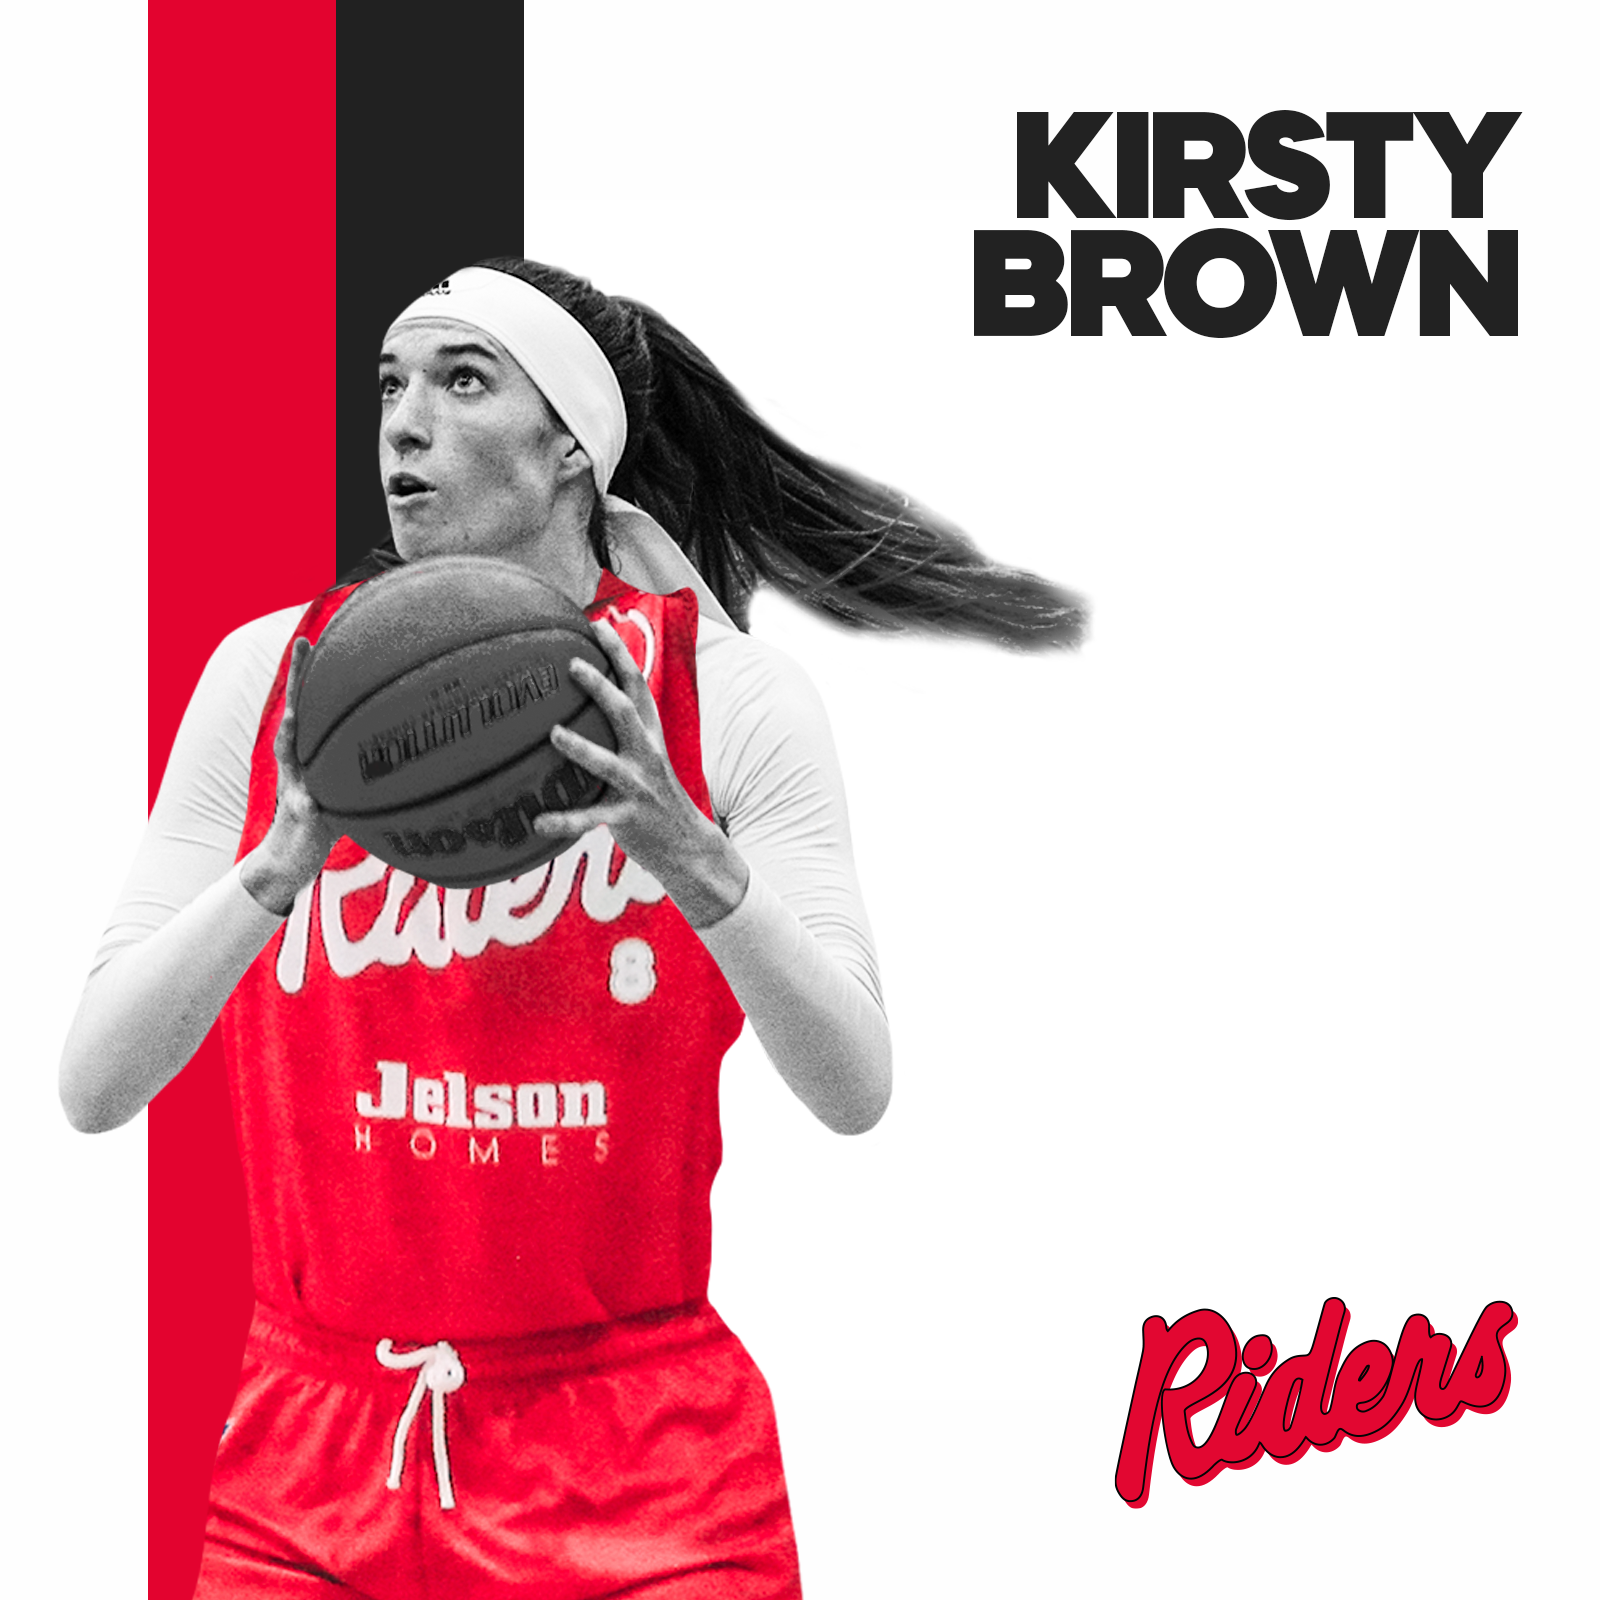 Kirsty Brown